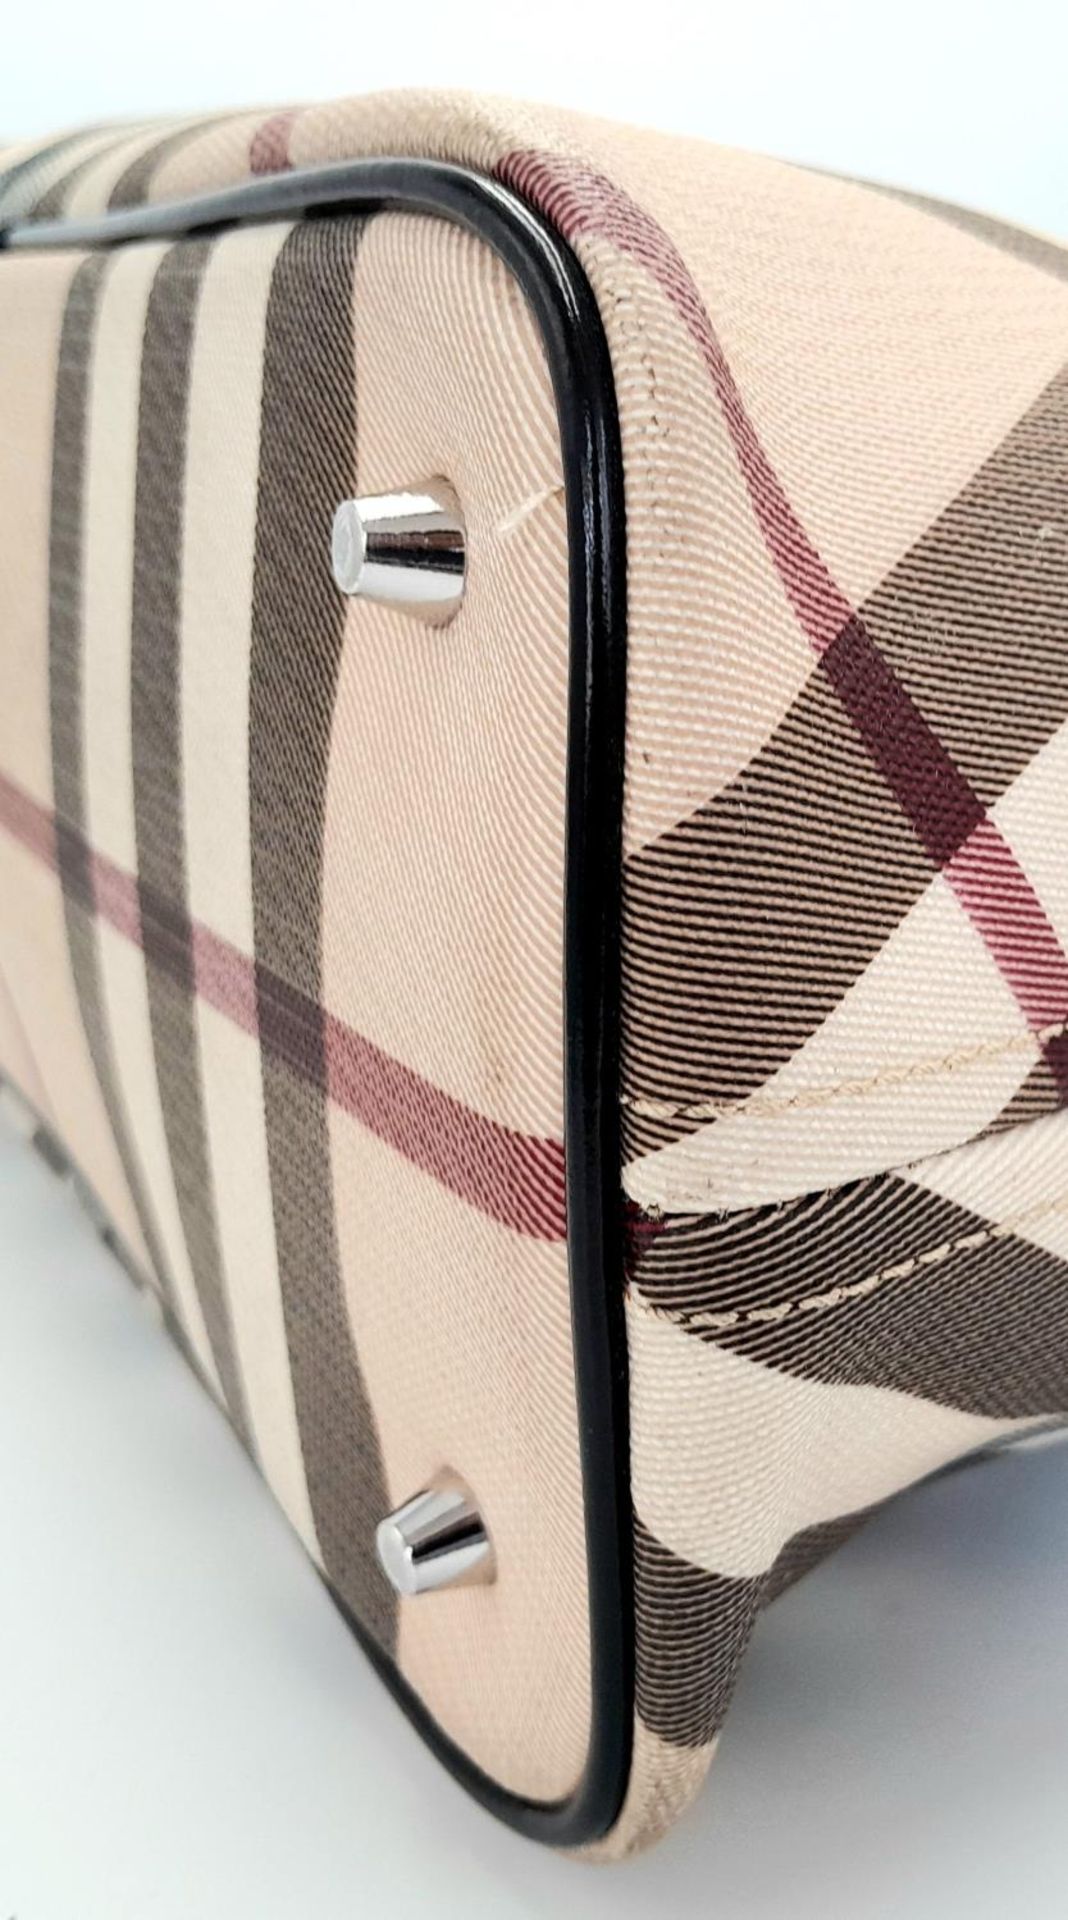 A Burberry Beige Check Nova Bag. Coated canvas exterior with leather trim, two leather straps, - Image 4 of 13